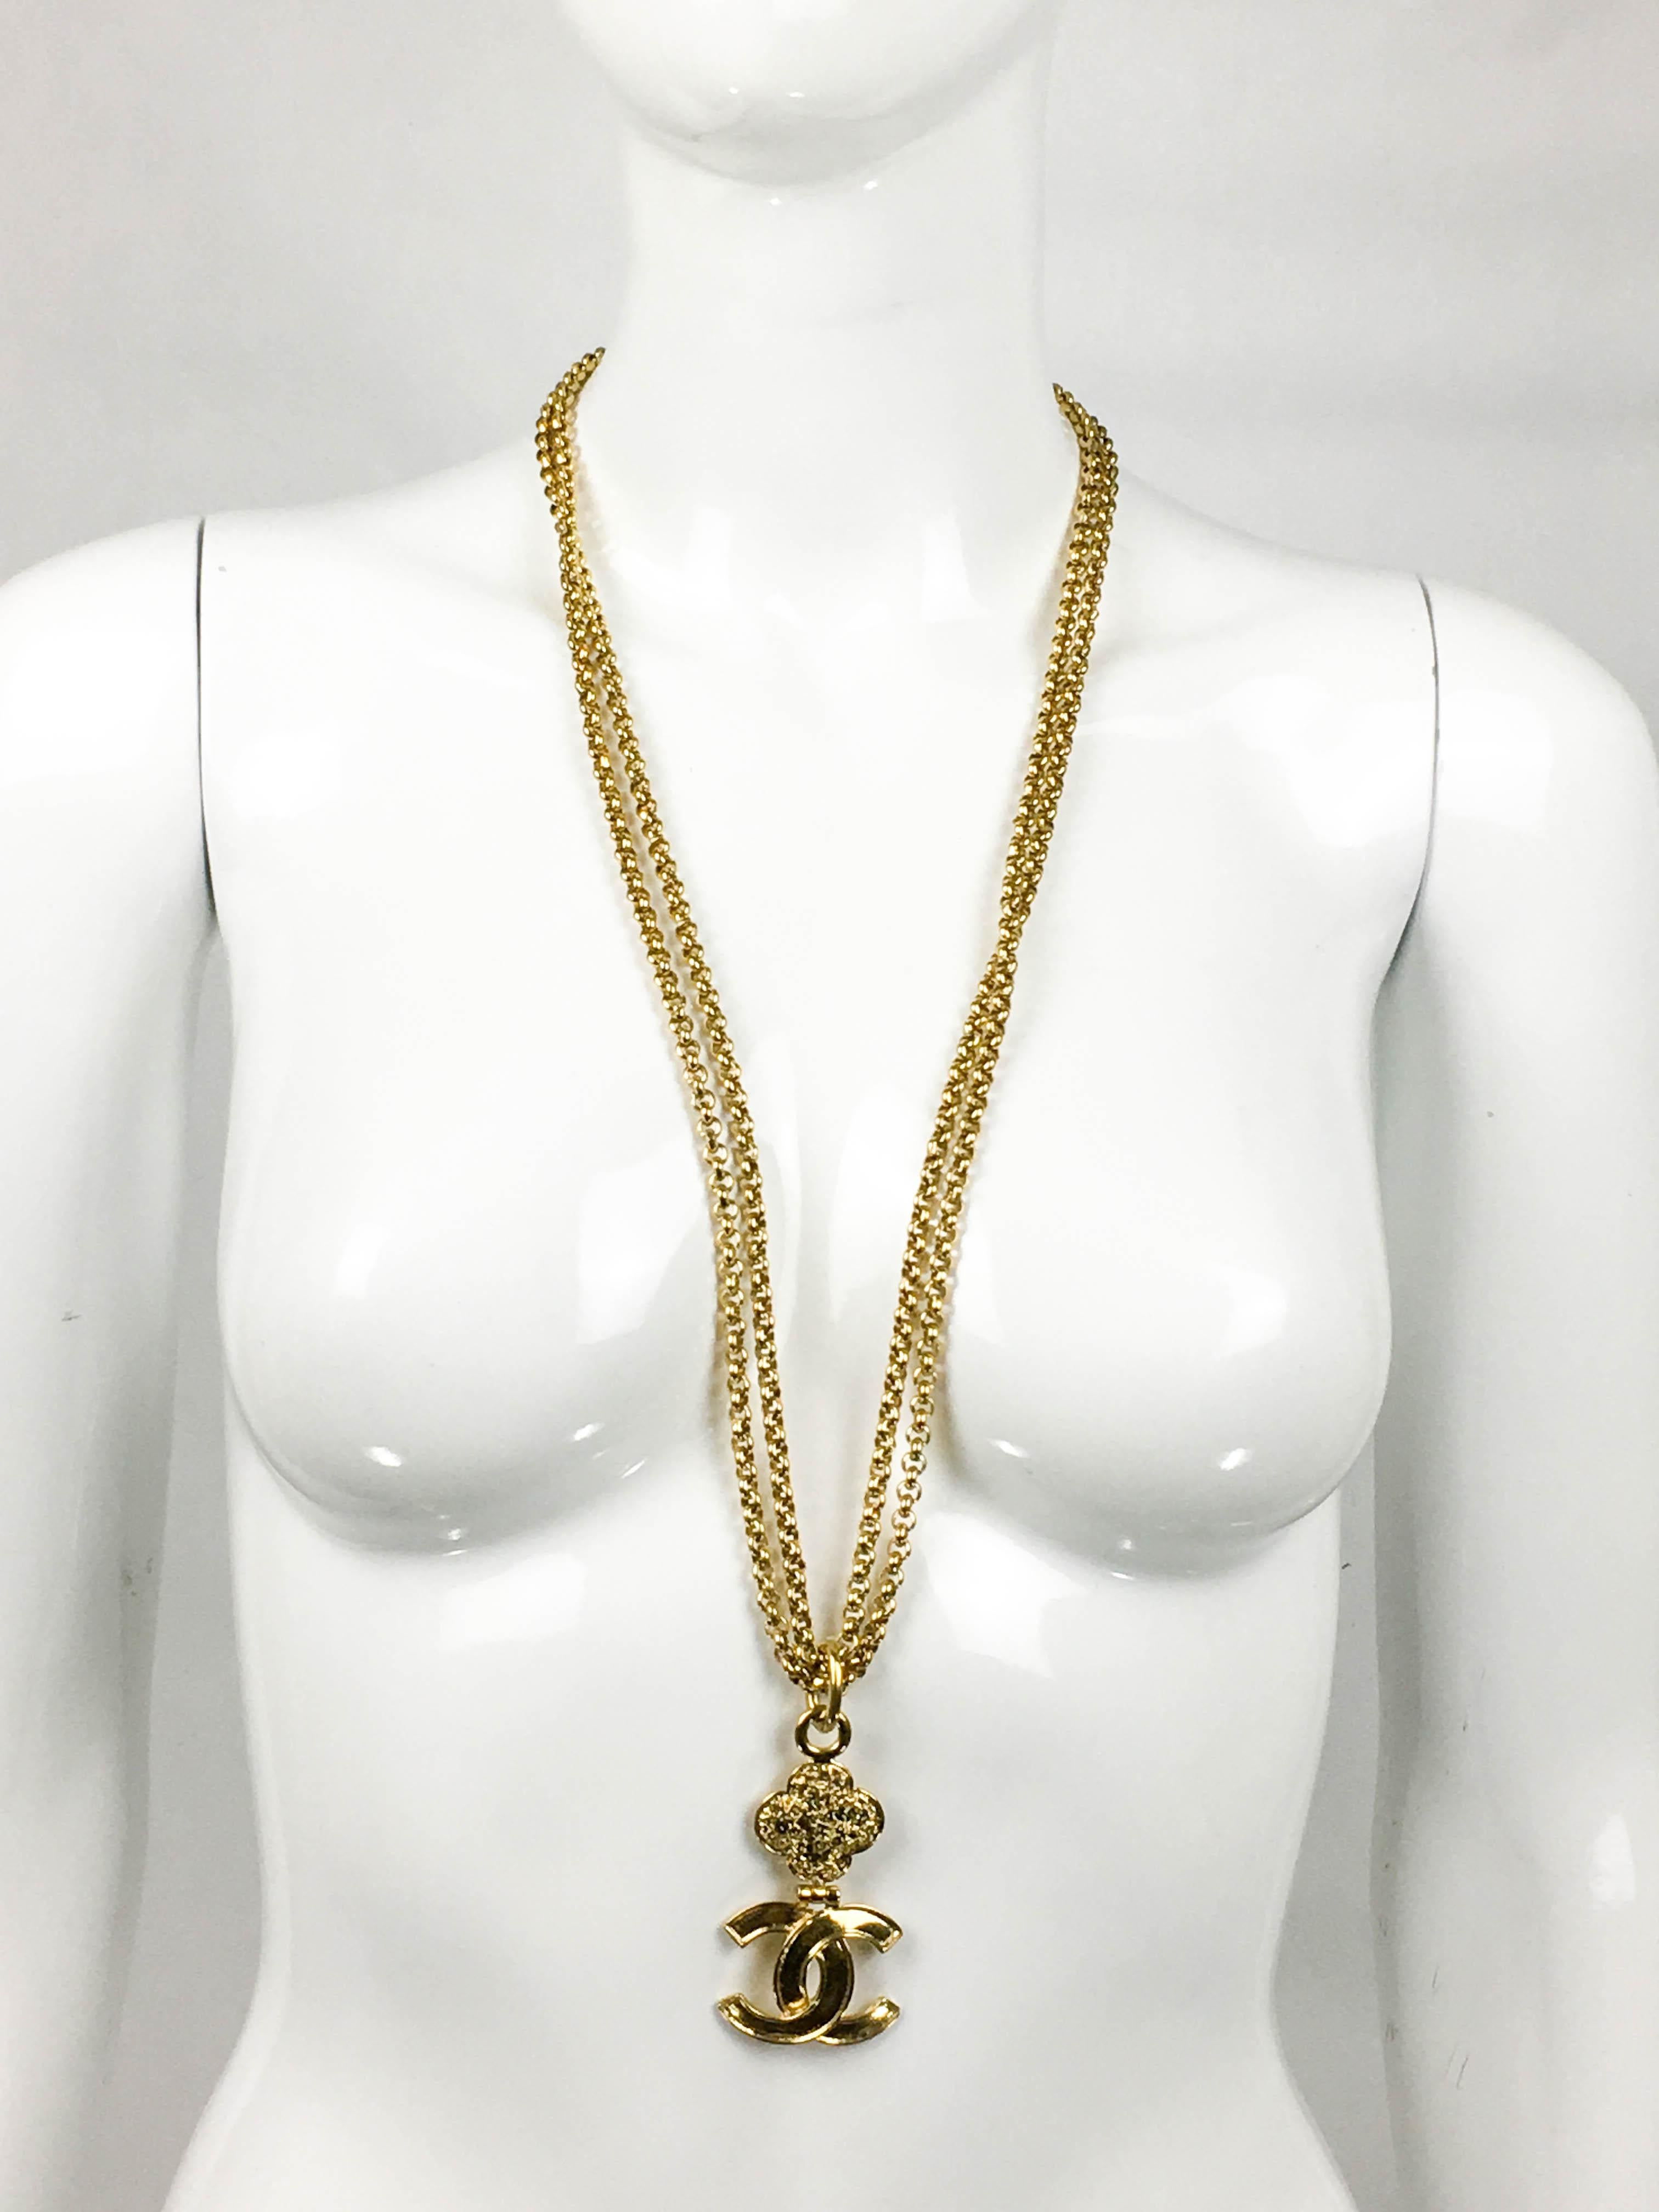 1995 Chanel Gilt Double-Chain Logo Pendant Necklace In Excellent Condition For Sale In London, Chelsea